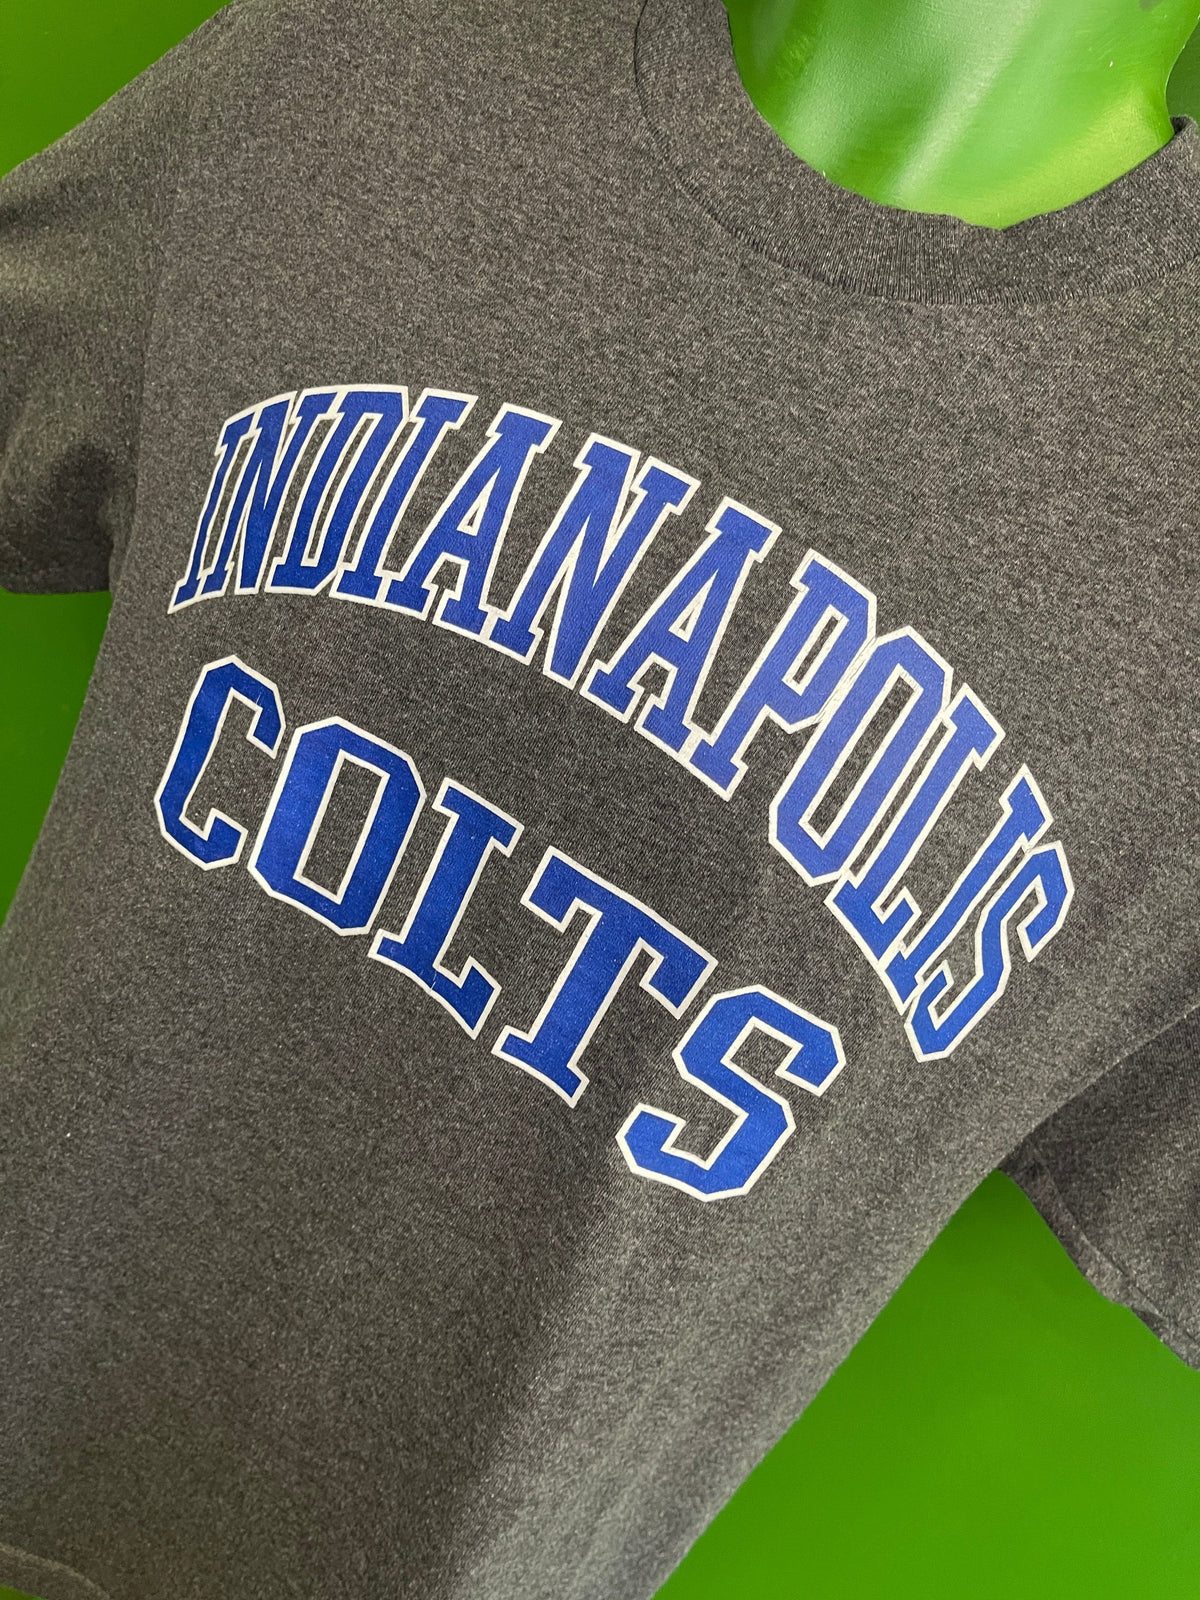 NFL Indianapolis Colts Heathered Grey Spellout T-Shirt Men's Medium